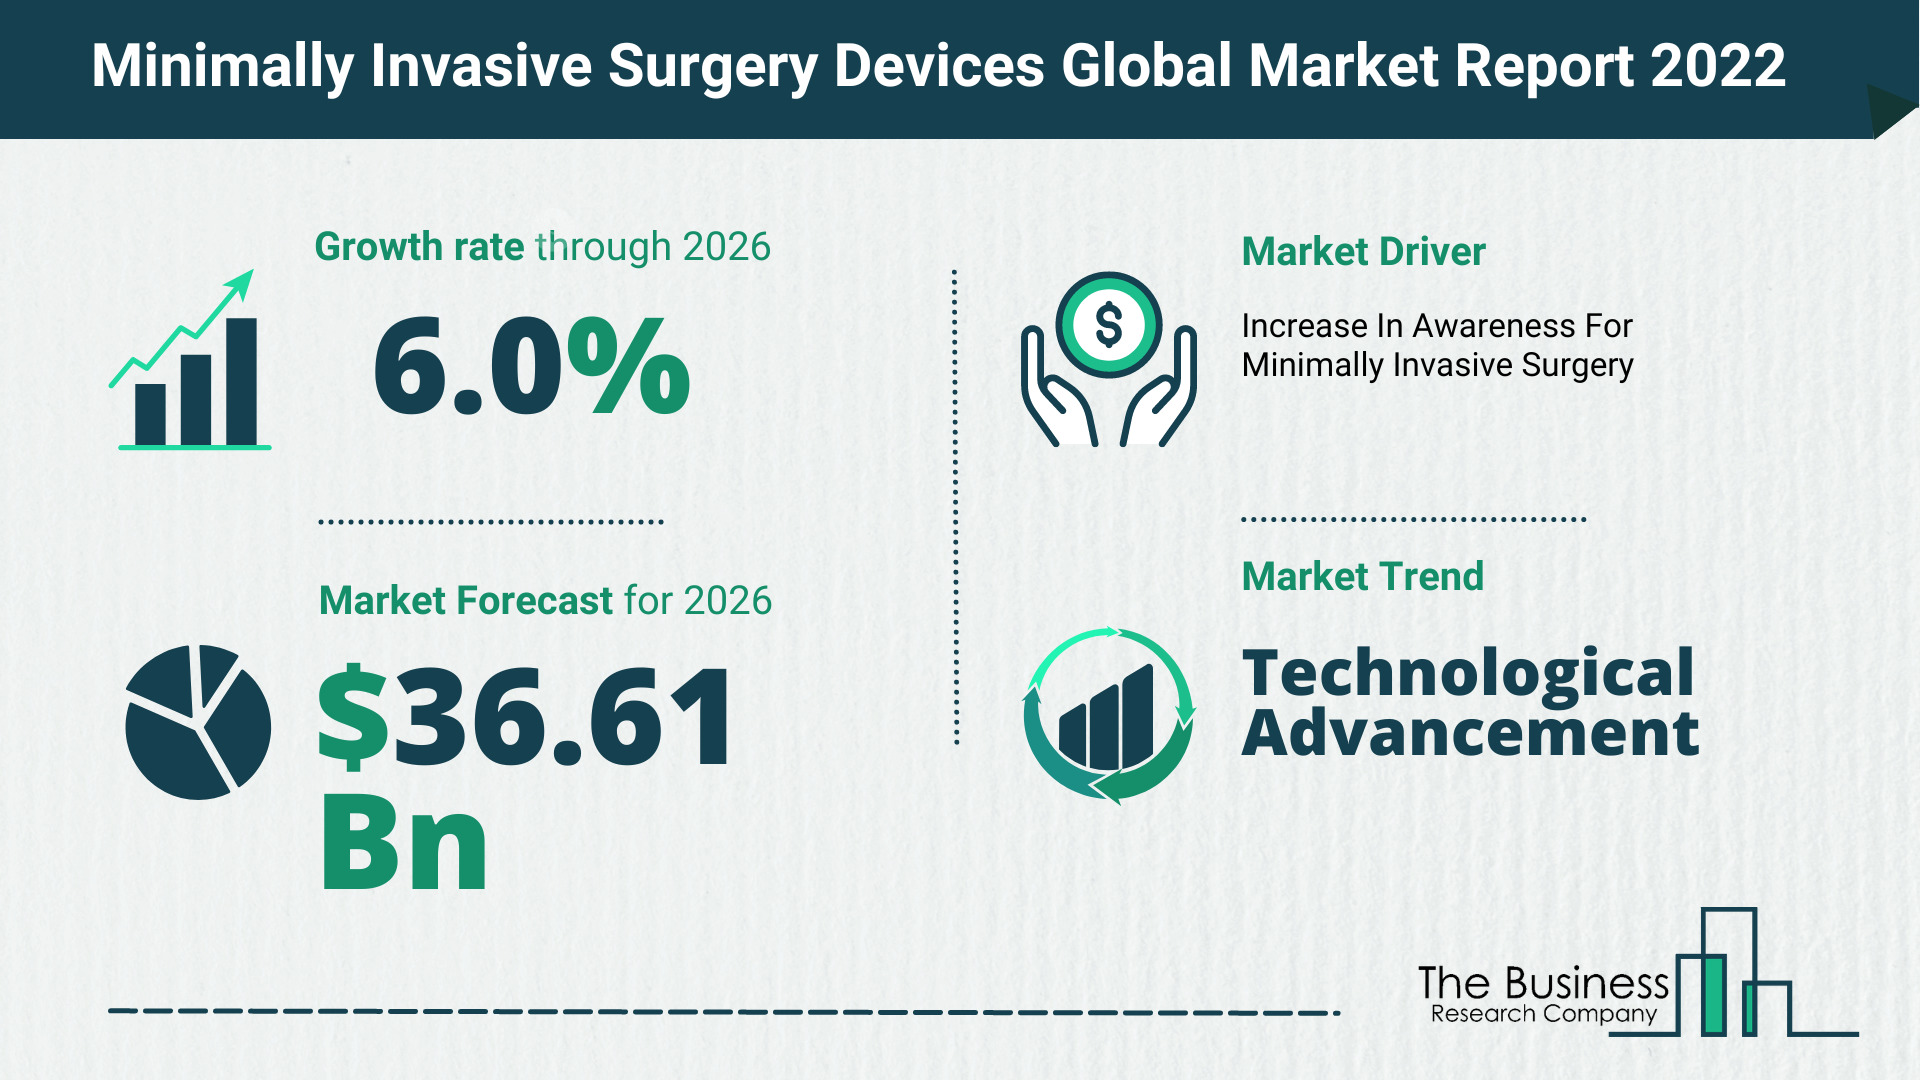 What Is The Minimally Invasive Surgery Devices Market Overview In 2022?